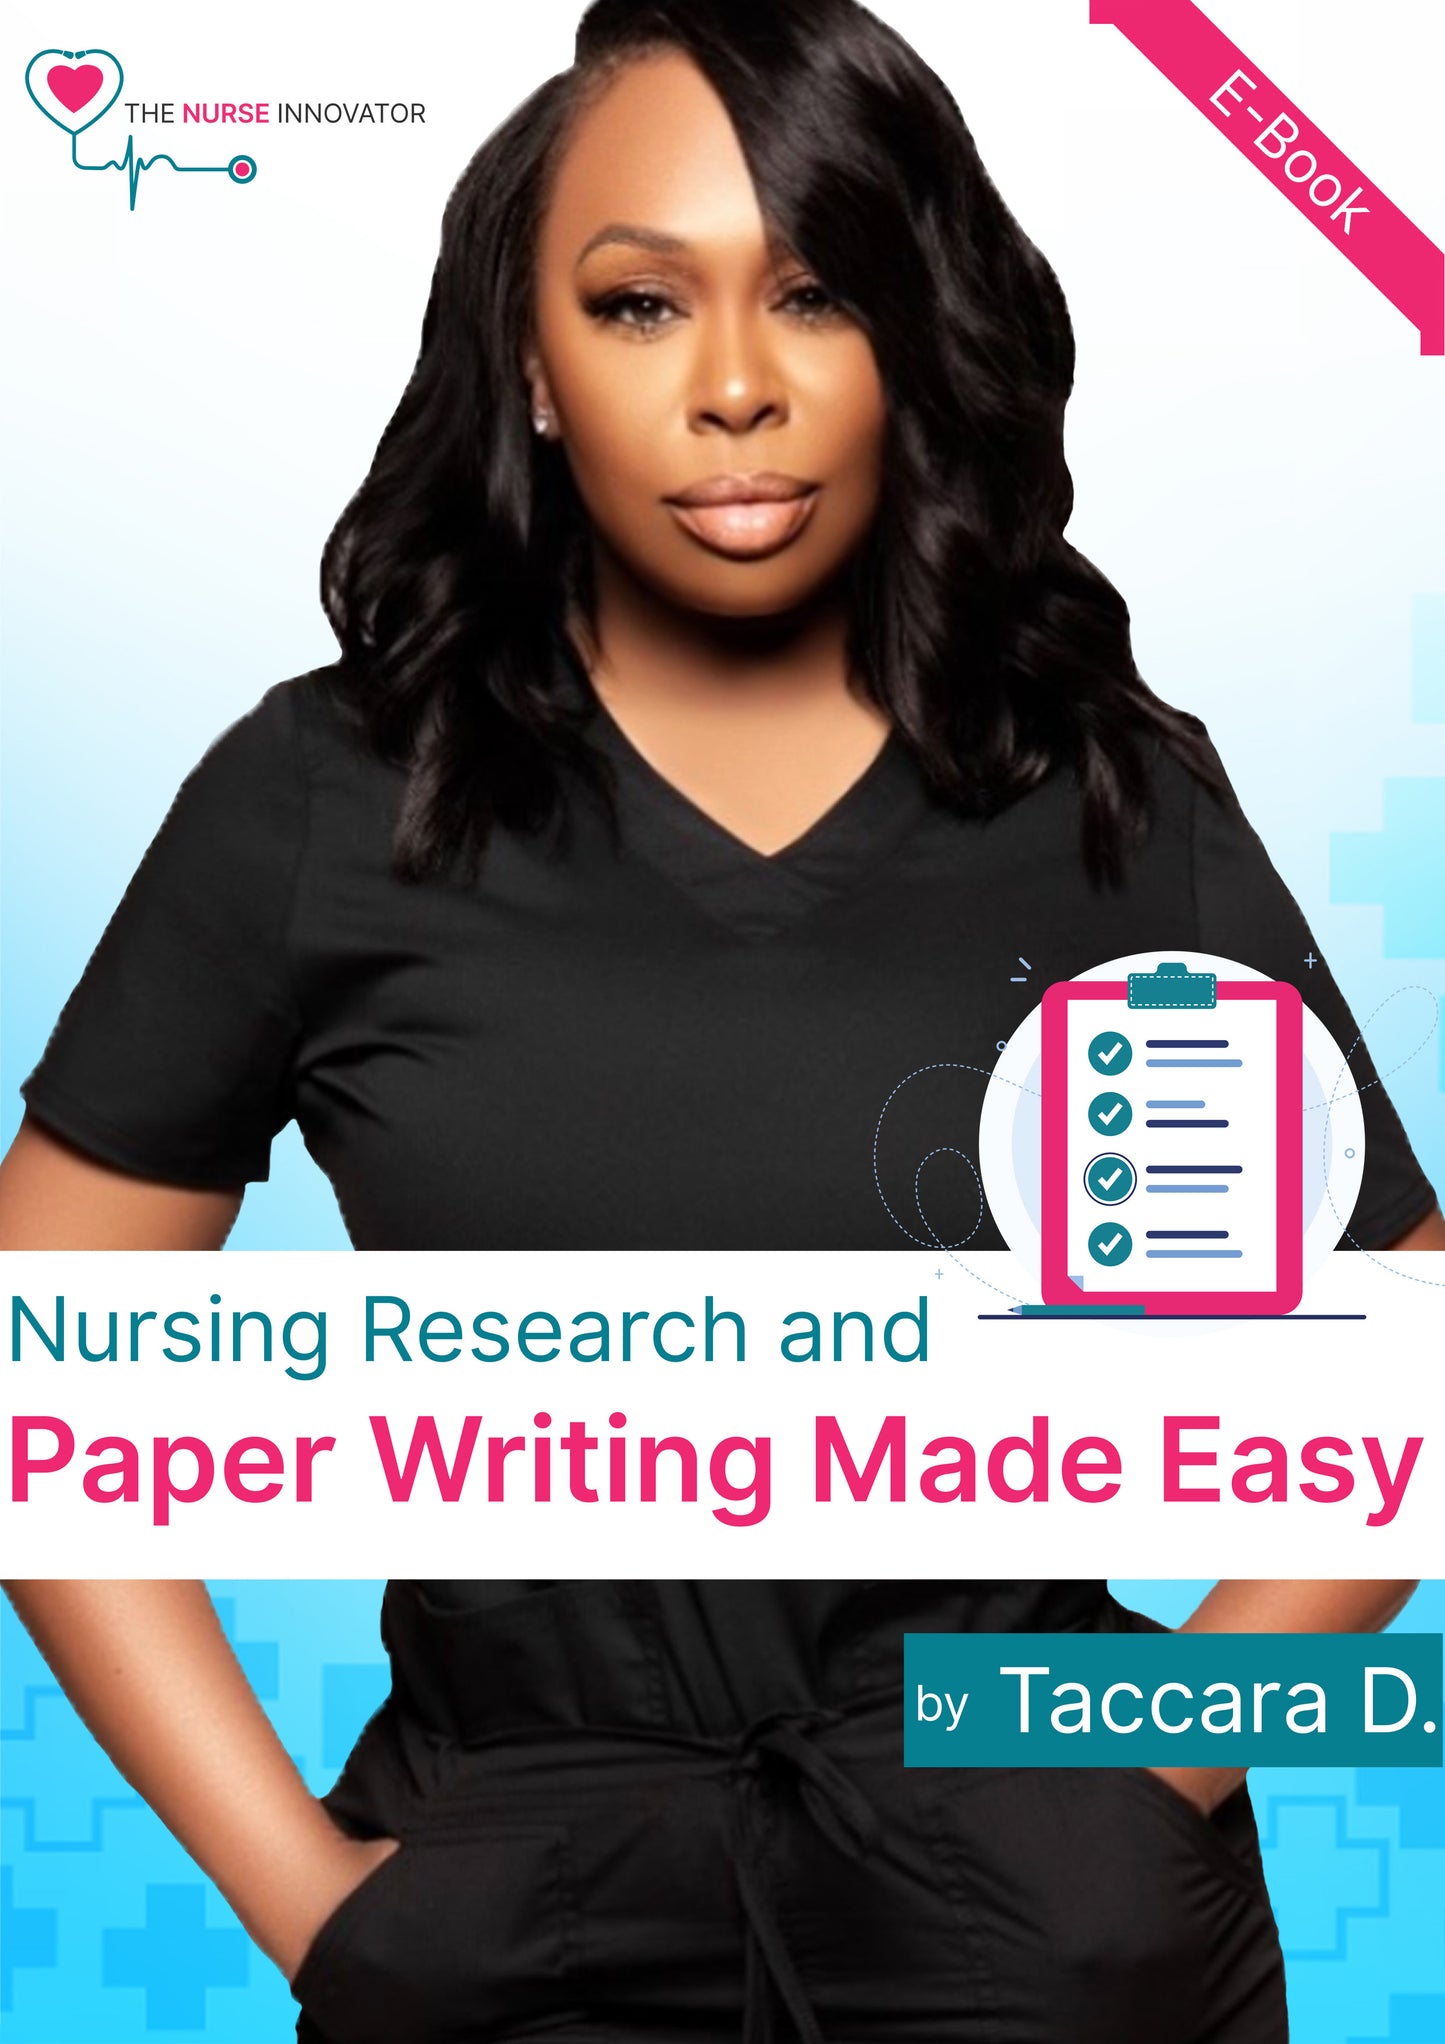 Nursing Research and Paper Writing Made Easy